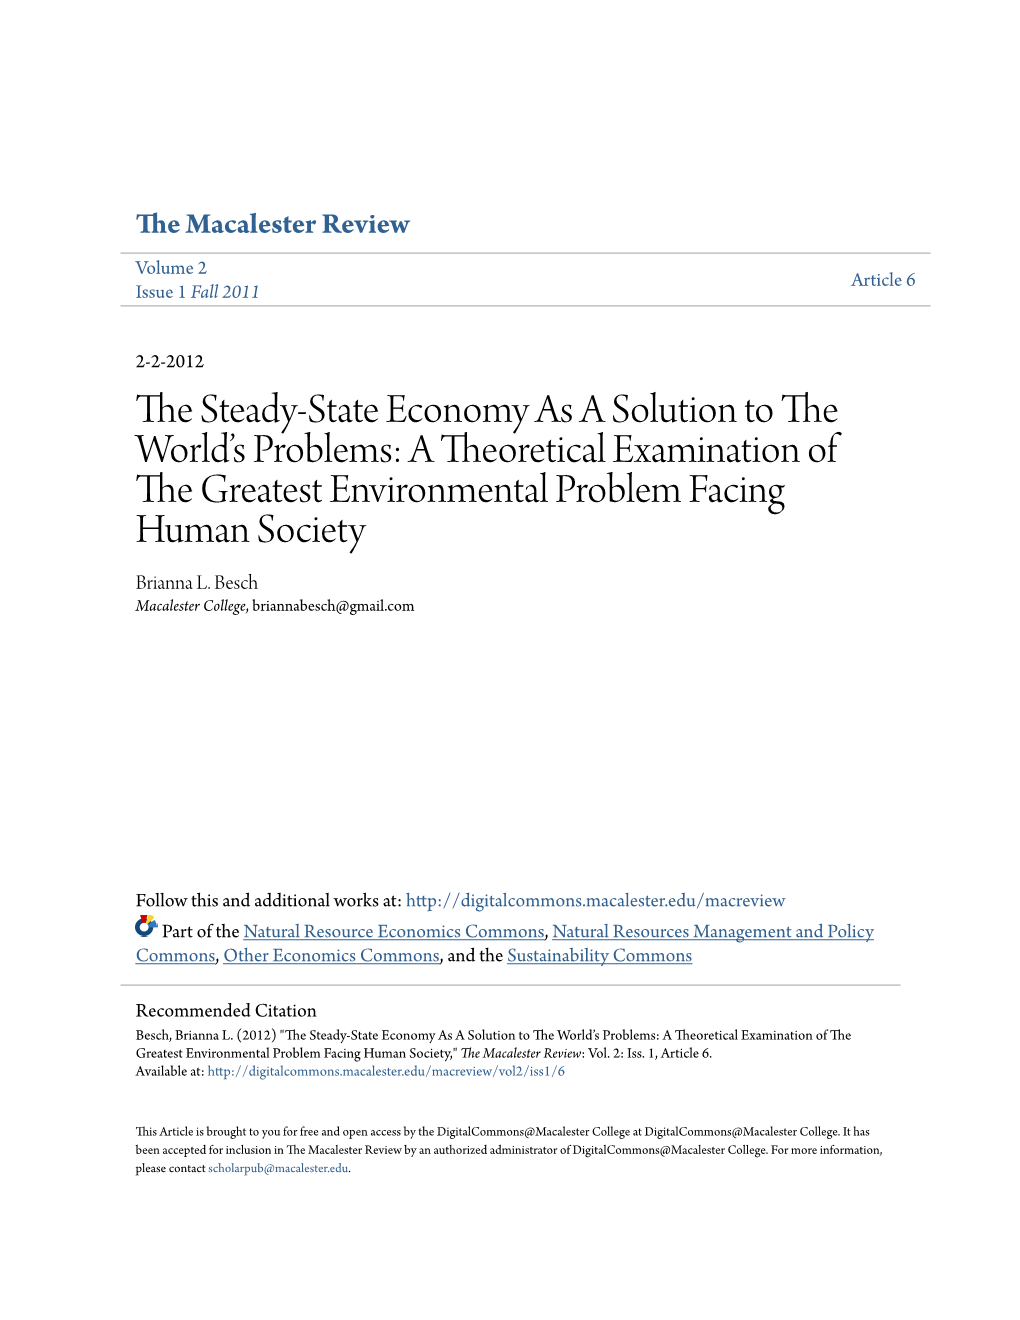 The Steady-State Economy As a Solution to the World's Problems